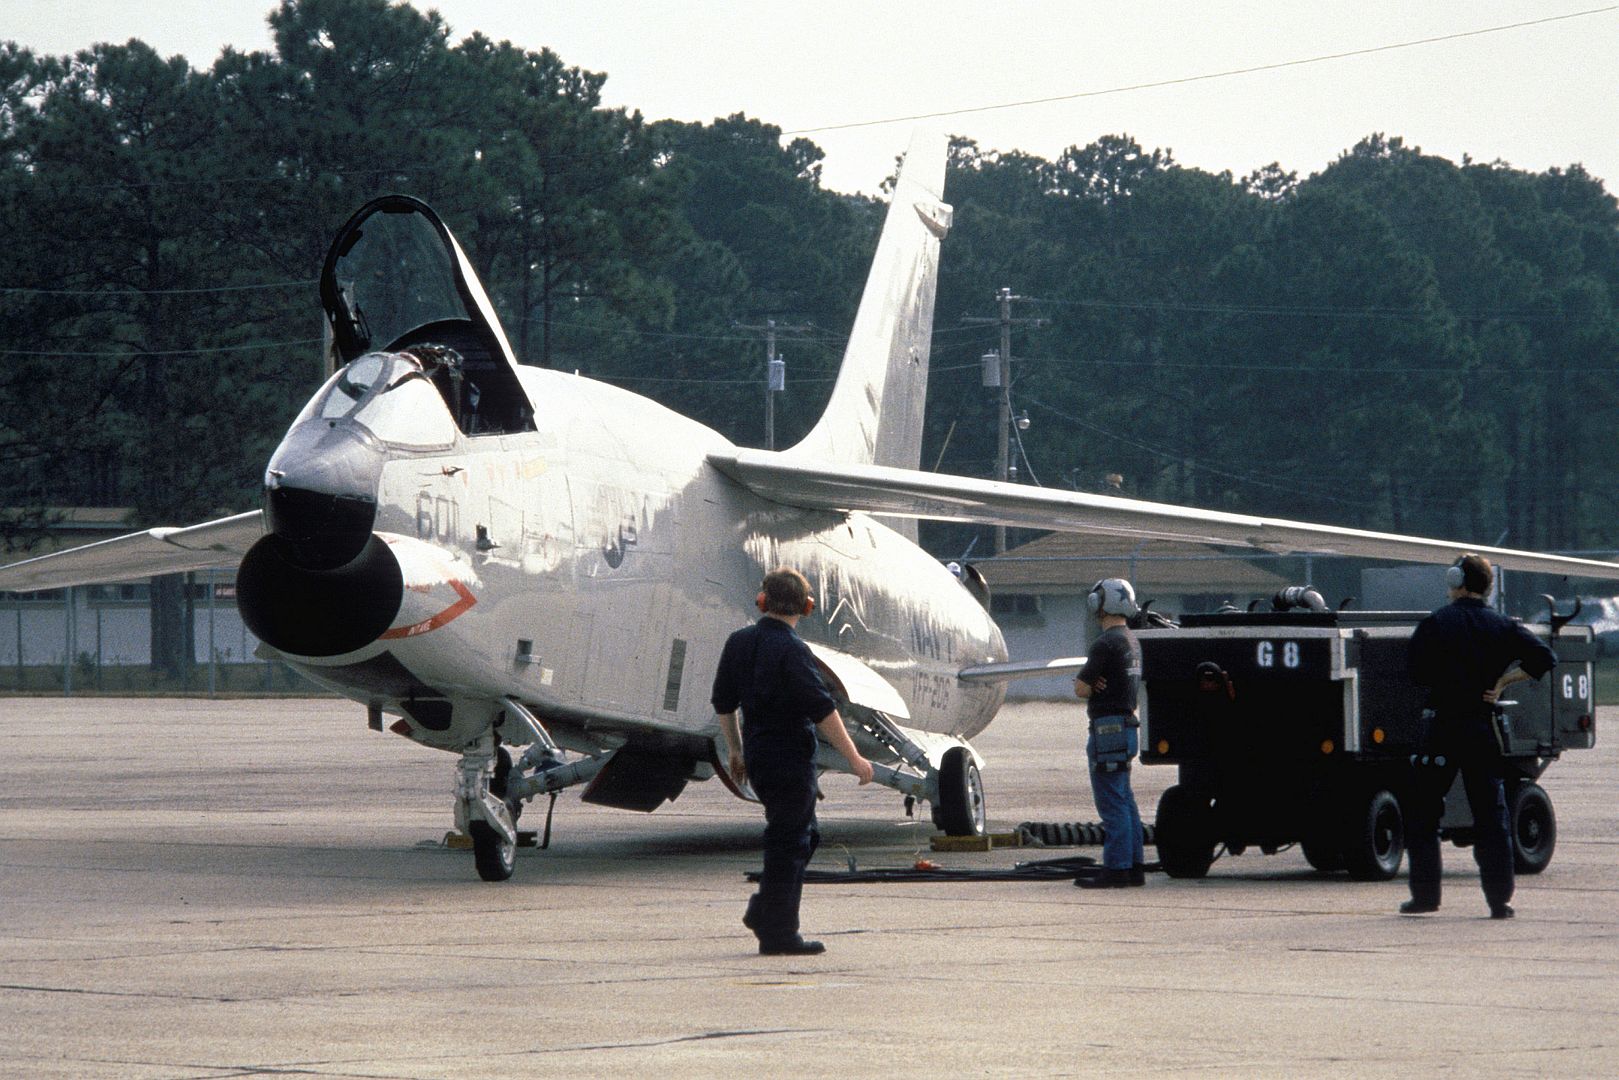 8G Crusader Photo Reconnaissance Aircraft Assigned To Light Photographic Squadron 206 As It Is Prepared For A Flight During Exercise PHOTO FINISH 81